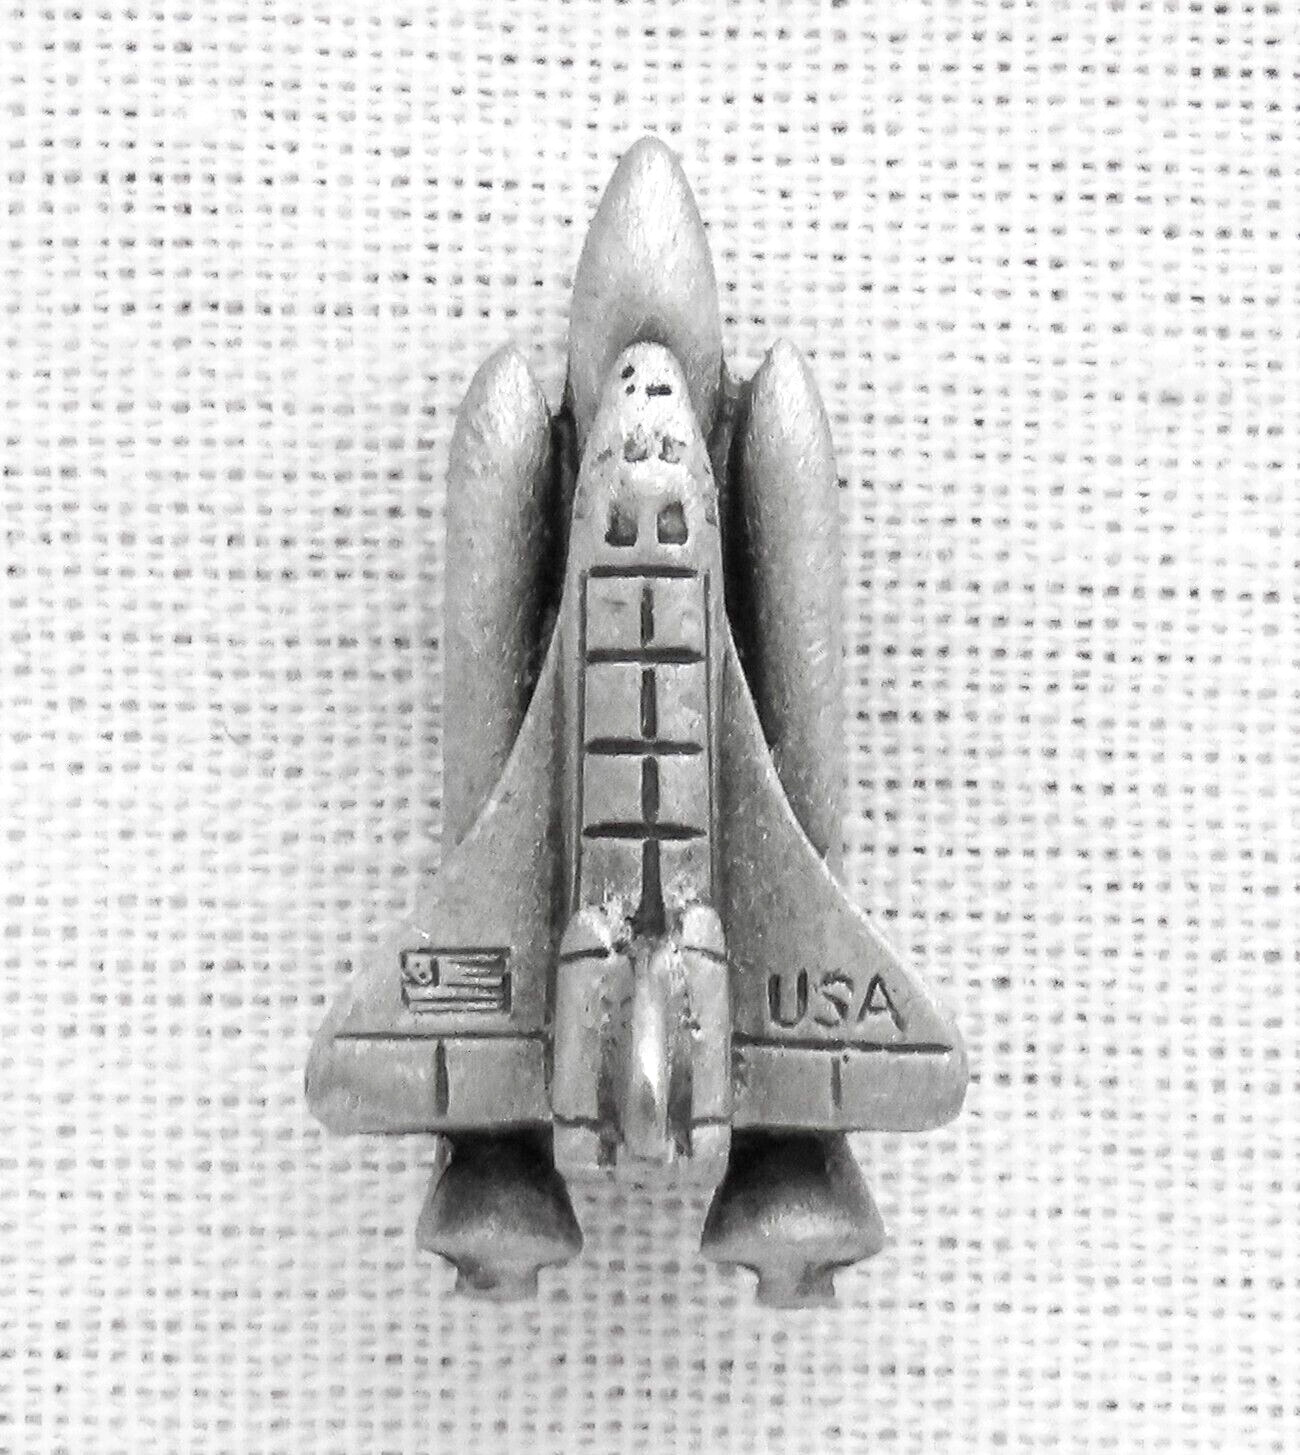 NASA Space Shuttle Fort Pewter Lapel Pin Vintage Kennedy Space Center USA Small